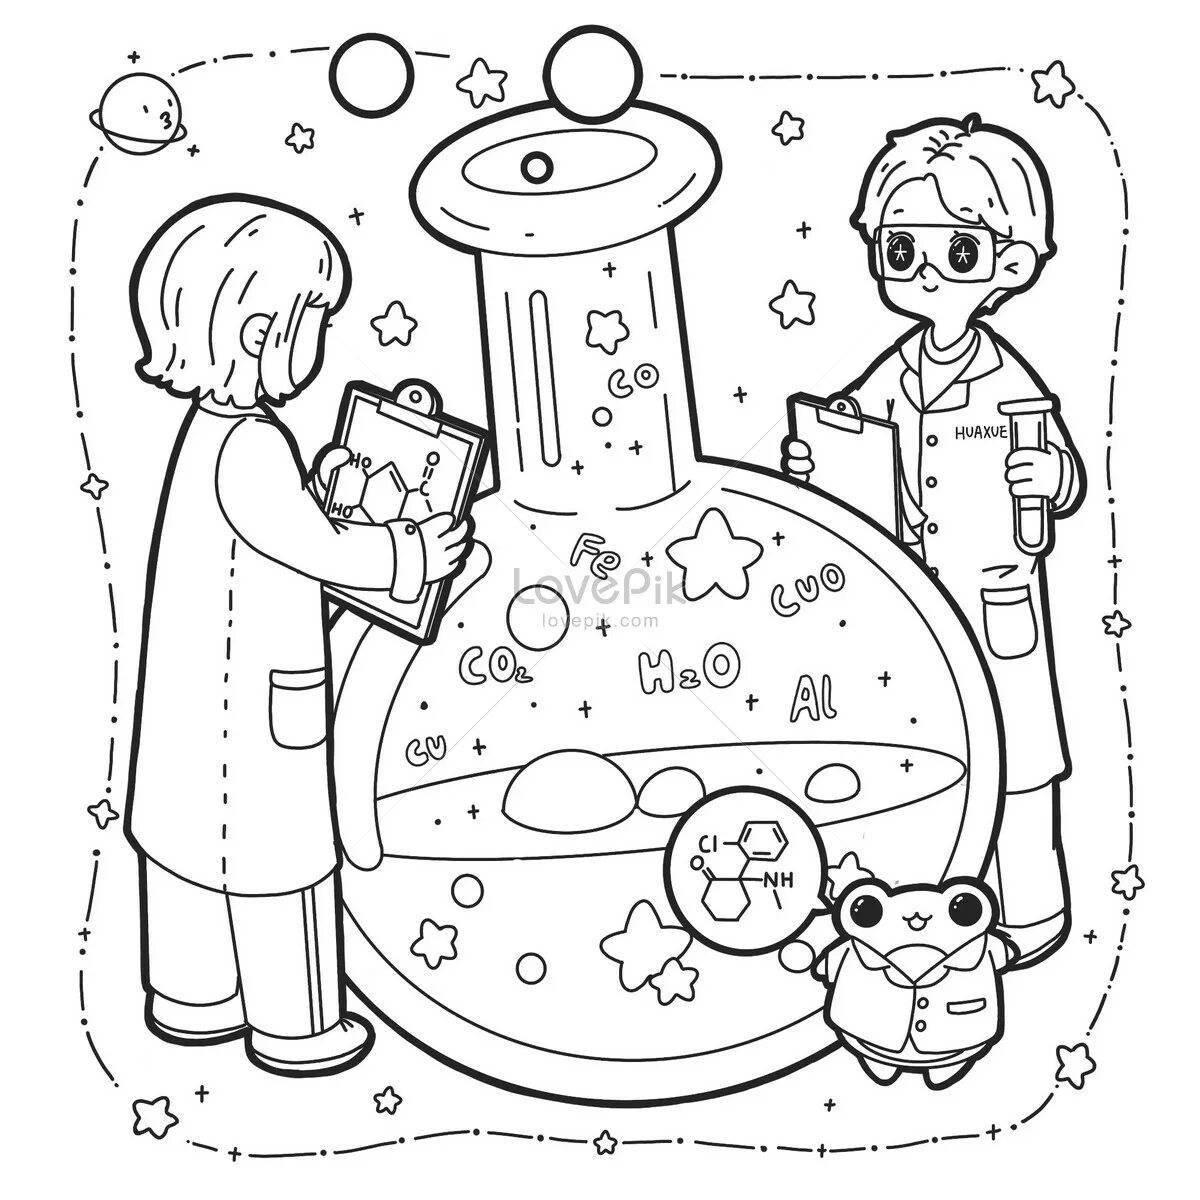 Coloring page stimulating chemistry lab